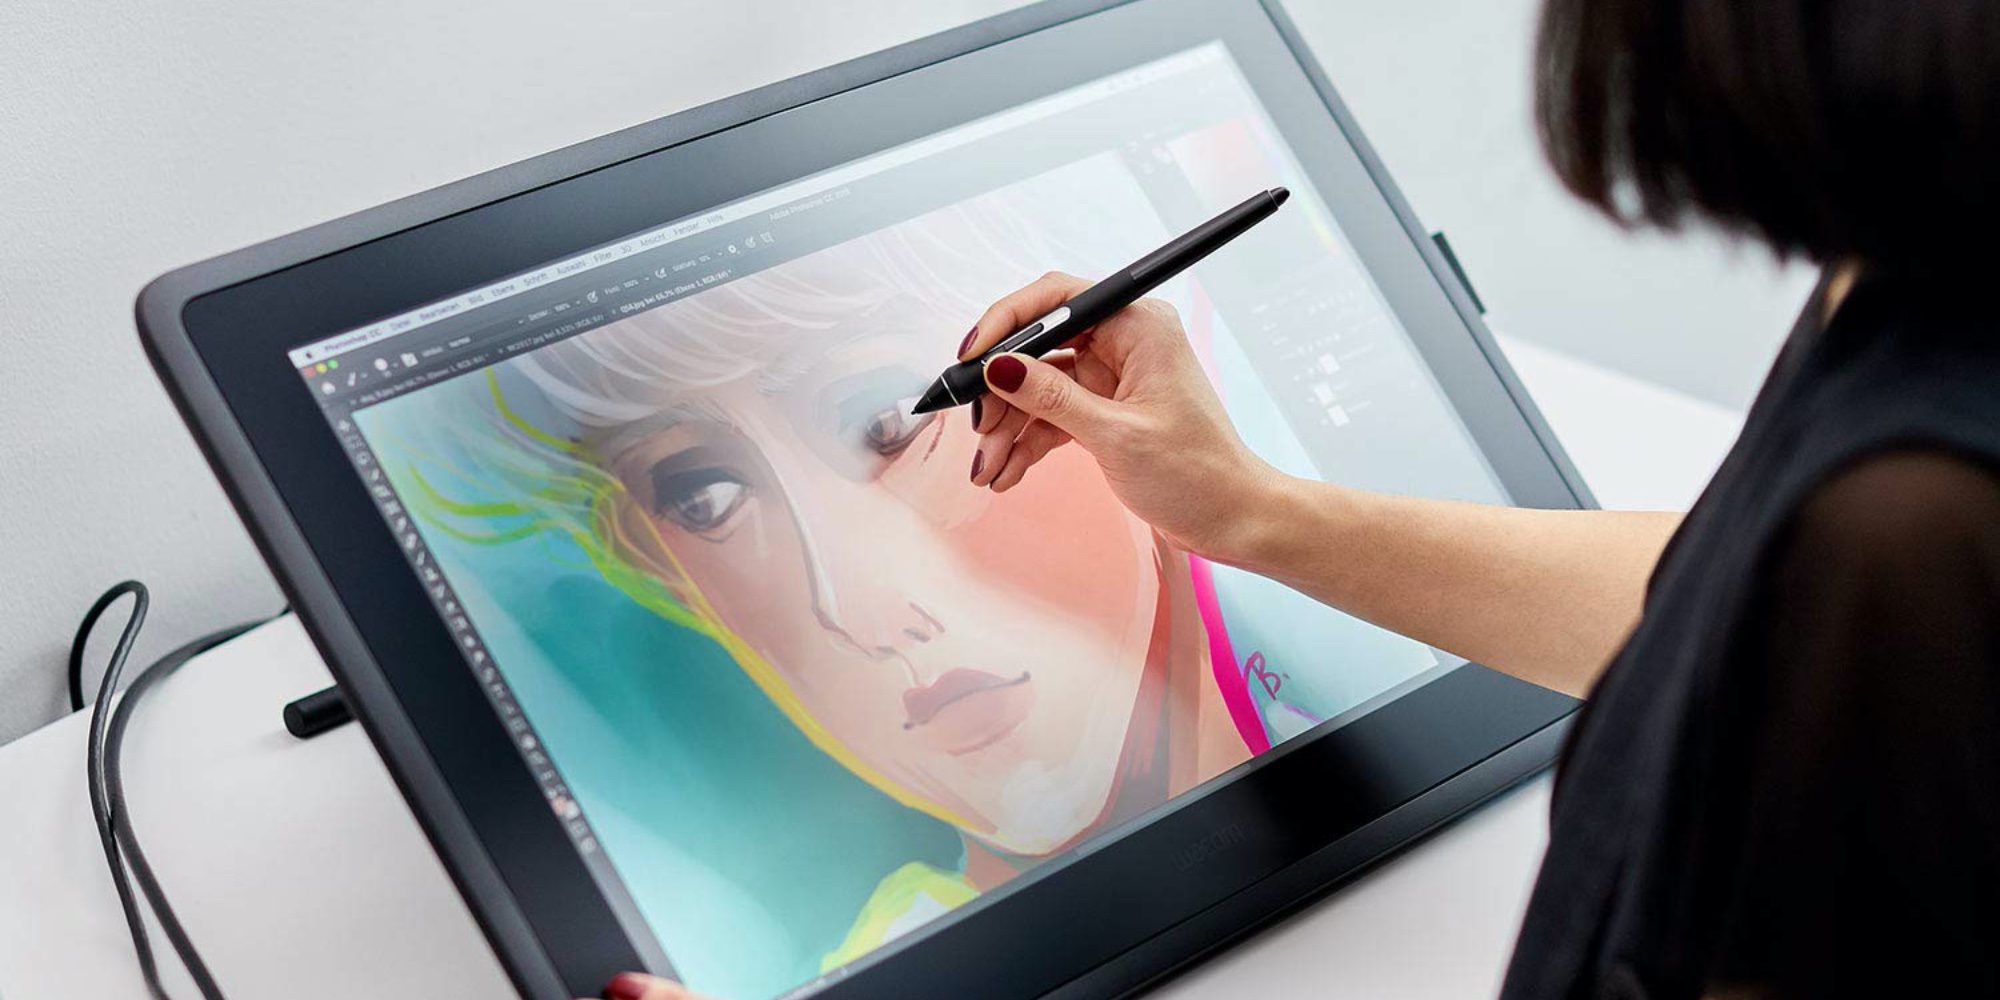 Cintiq 22 Drawing Tablet drops to new low at 300 off 9to5Toys